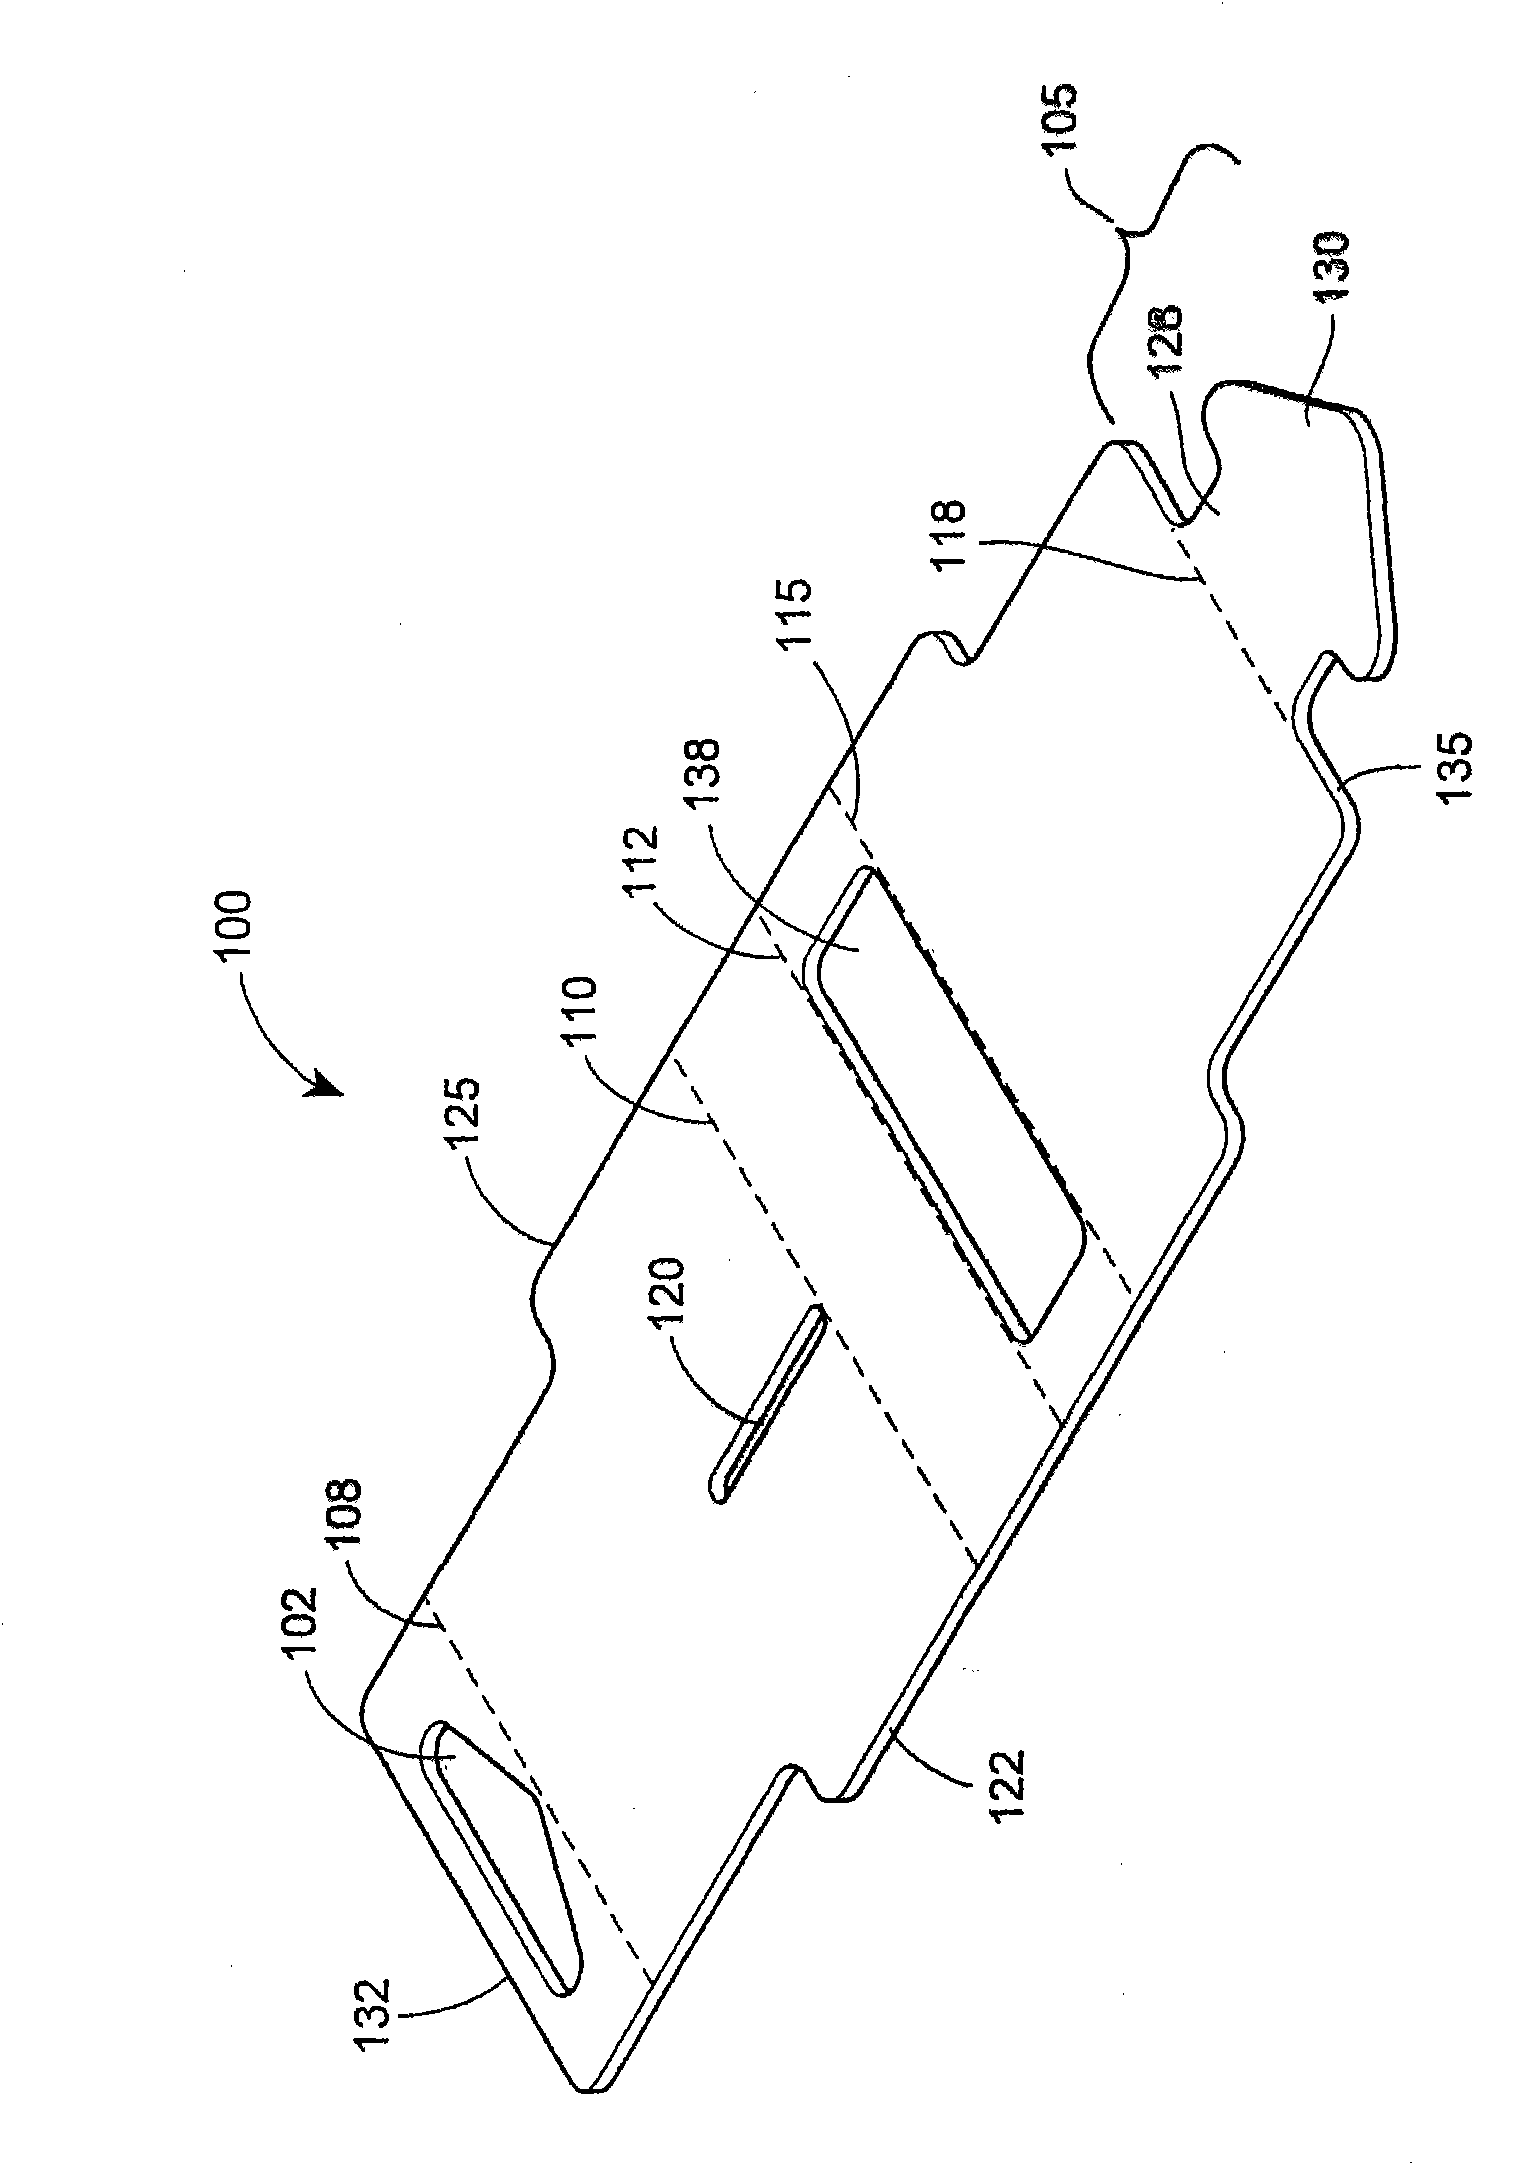 Aperture assembly for use with a photosensor system and a securing mechanism for the aperture assembly